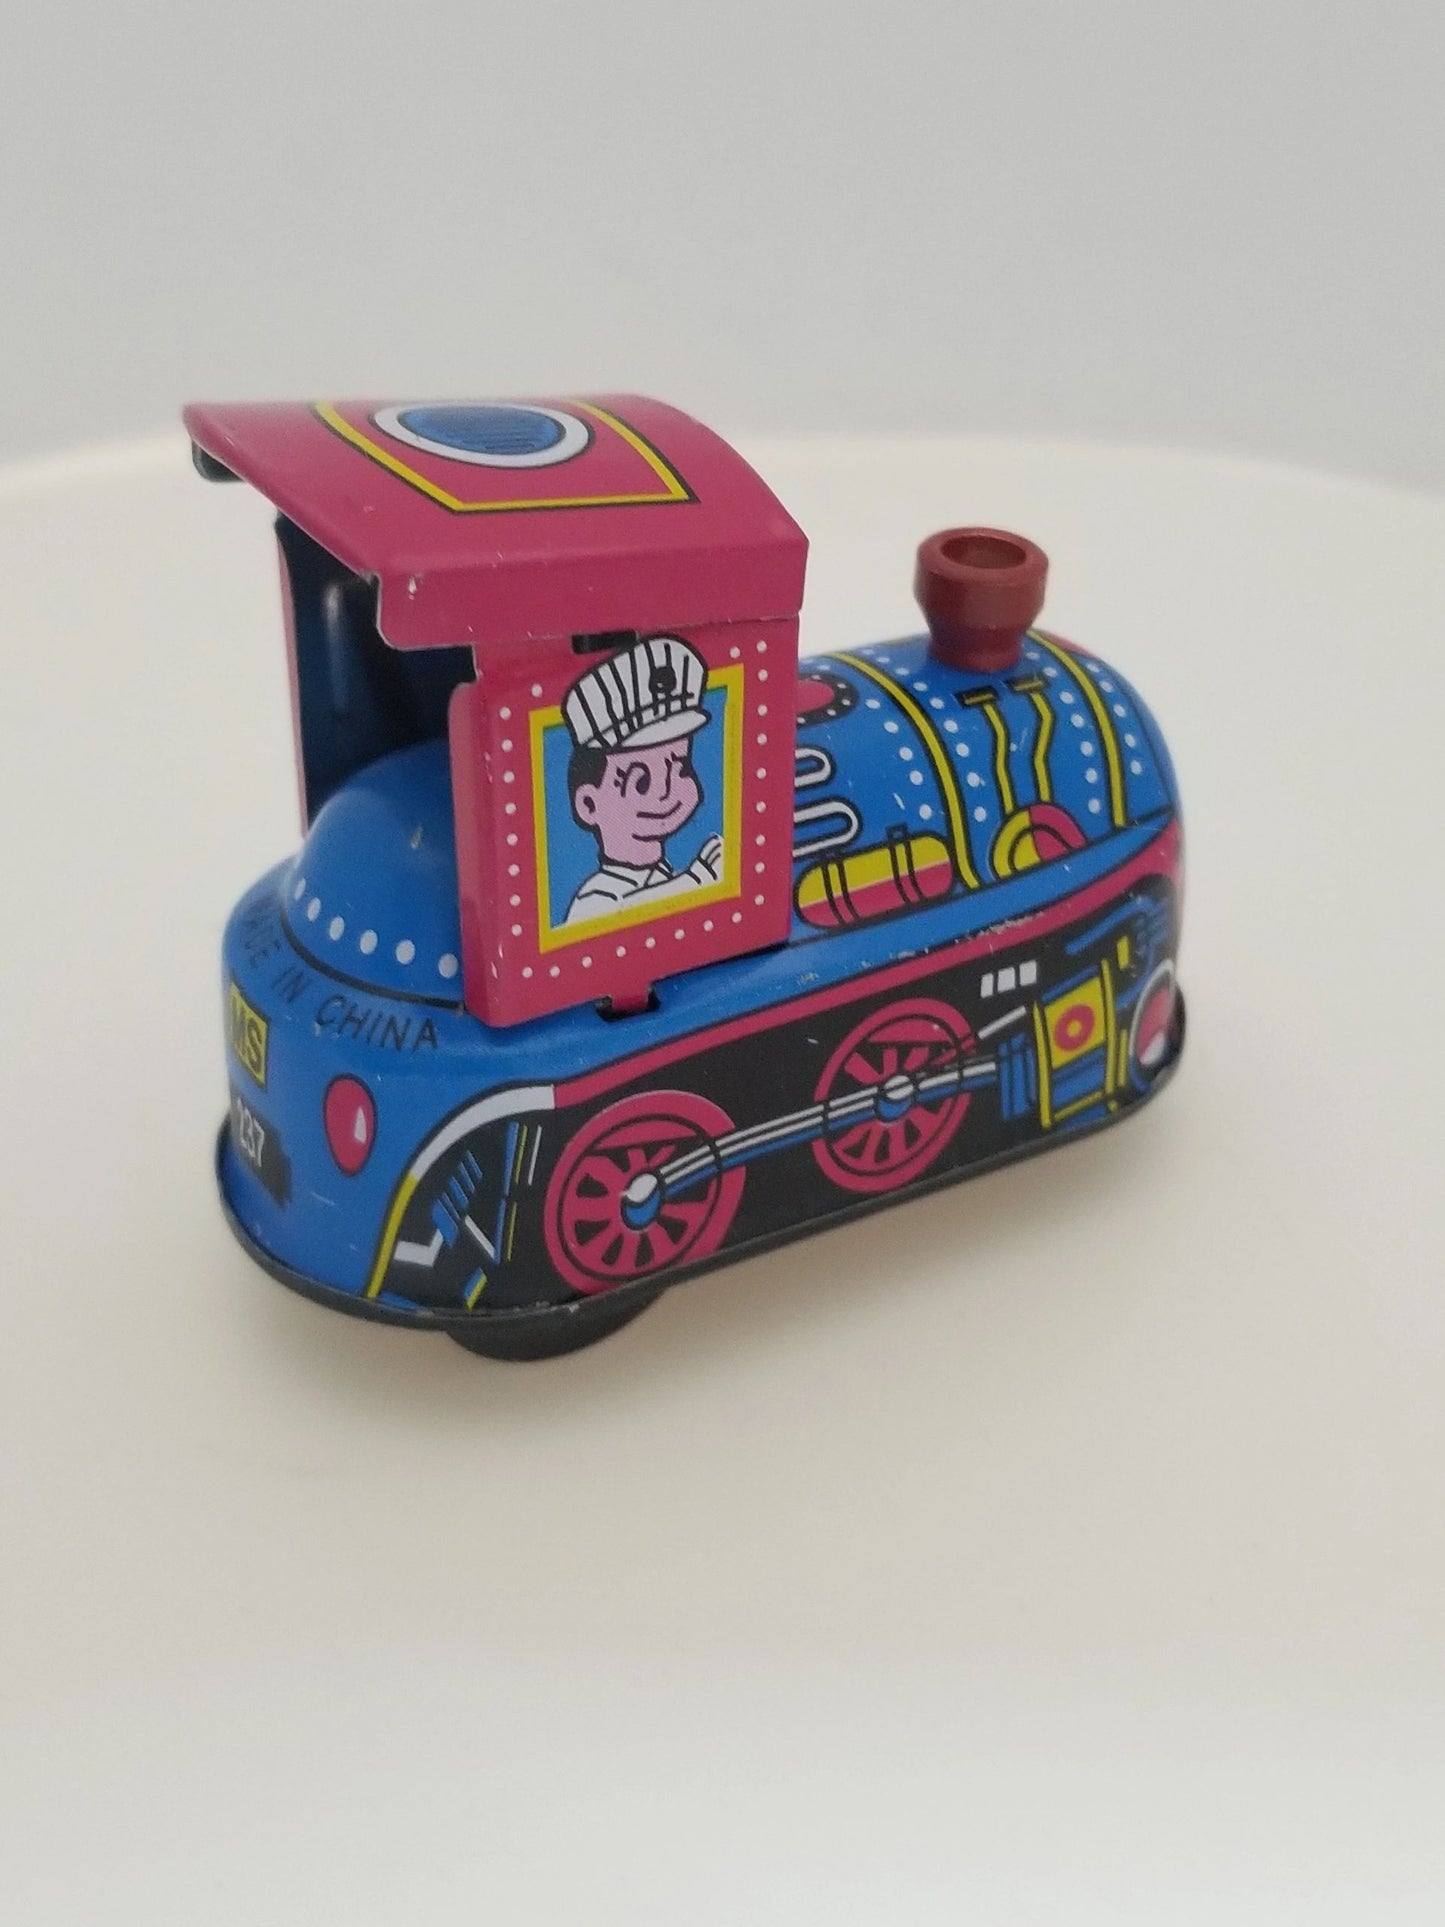 Tin Train Wind-up Collector's Toy